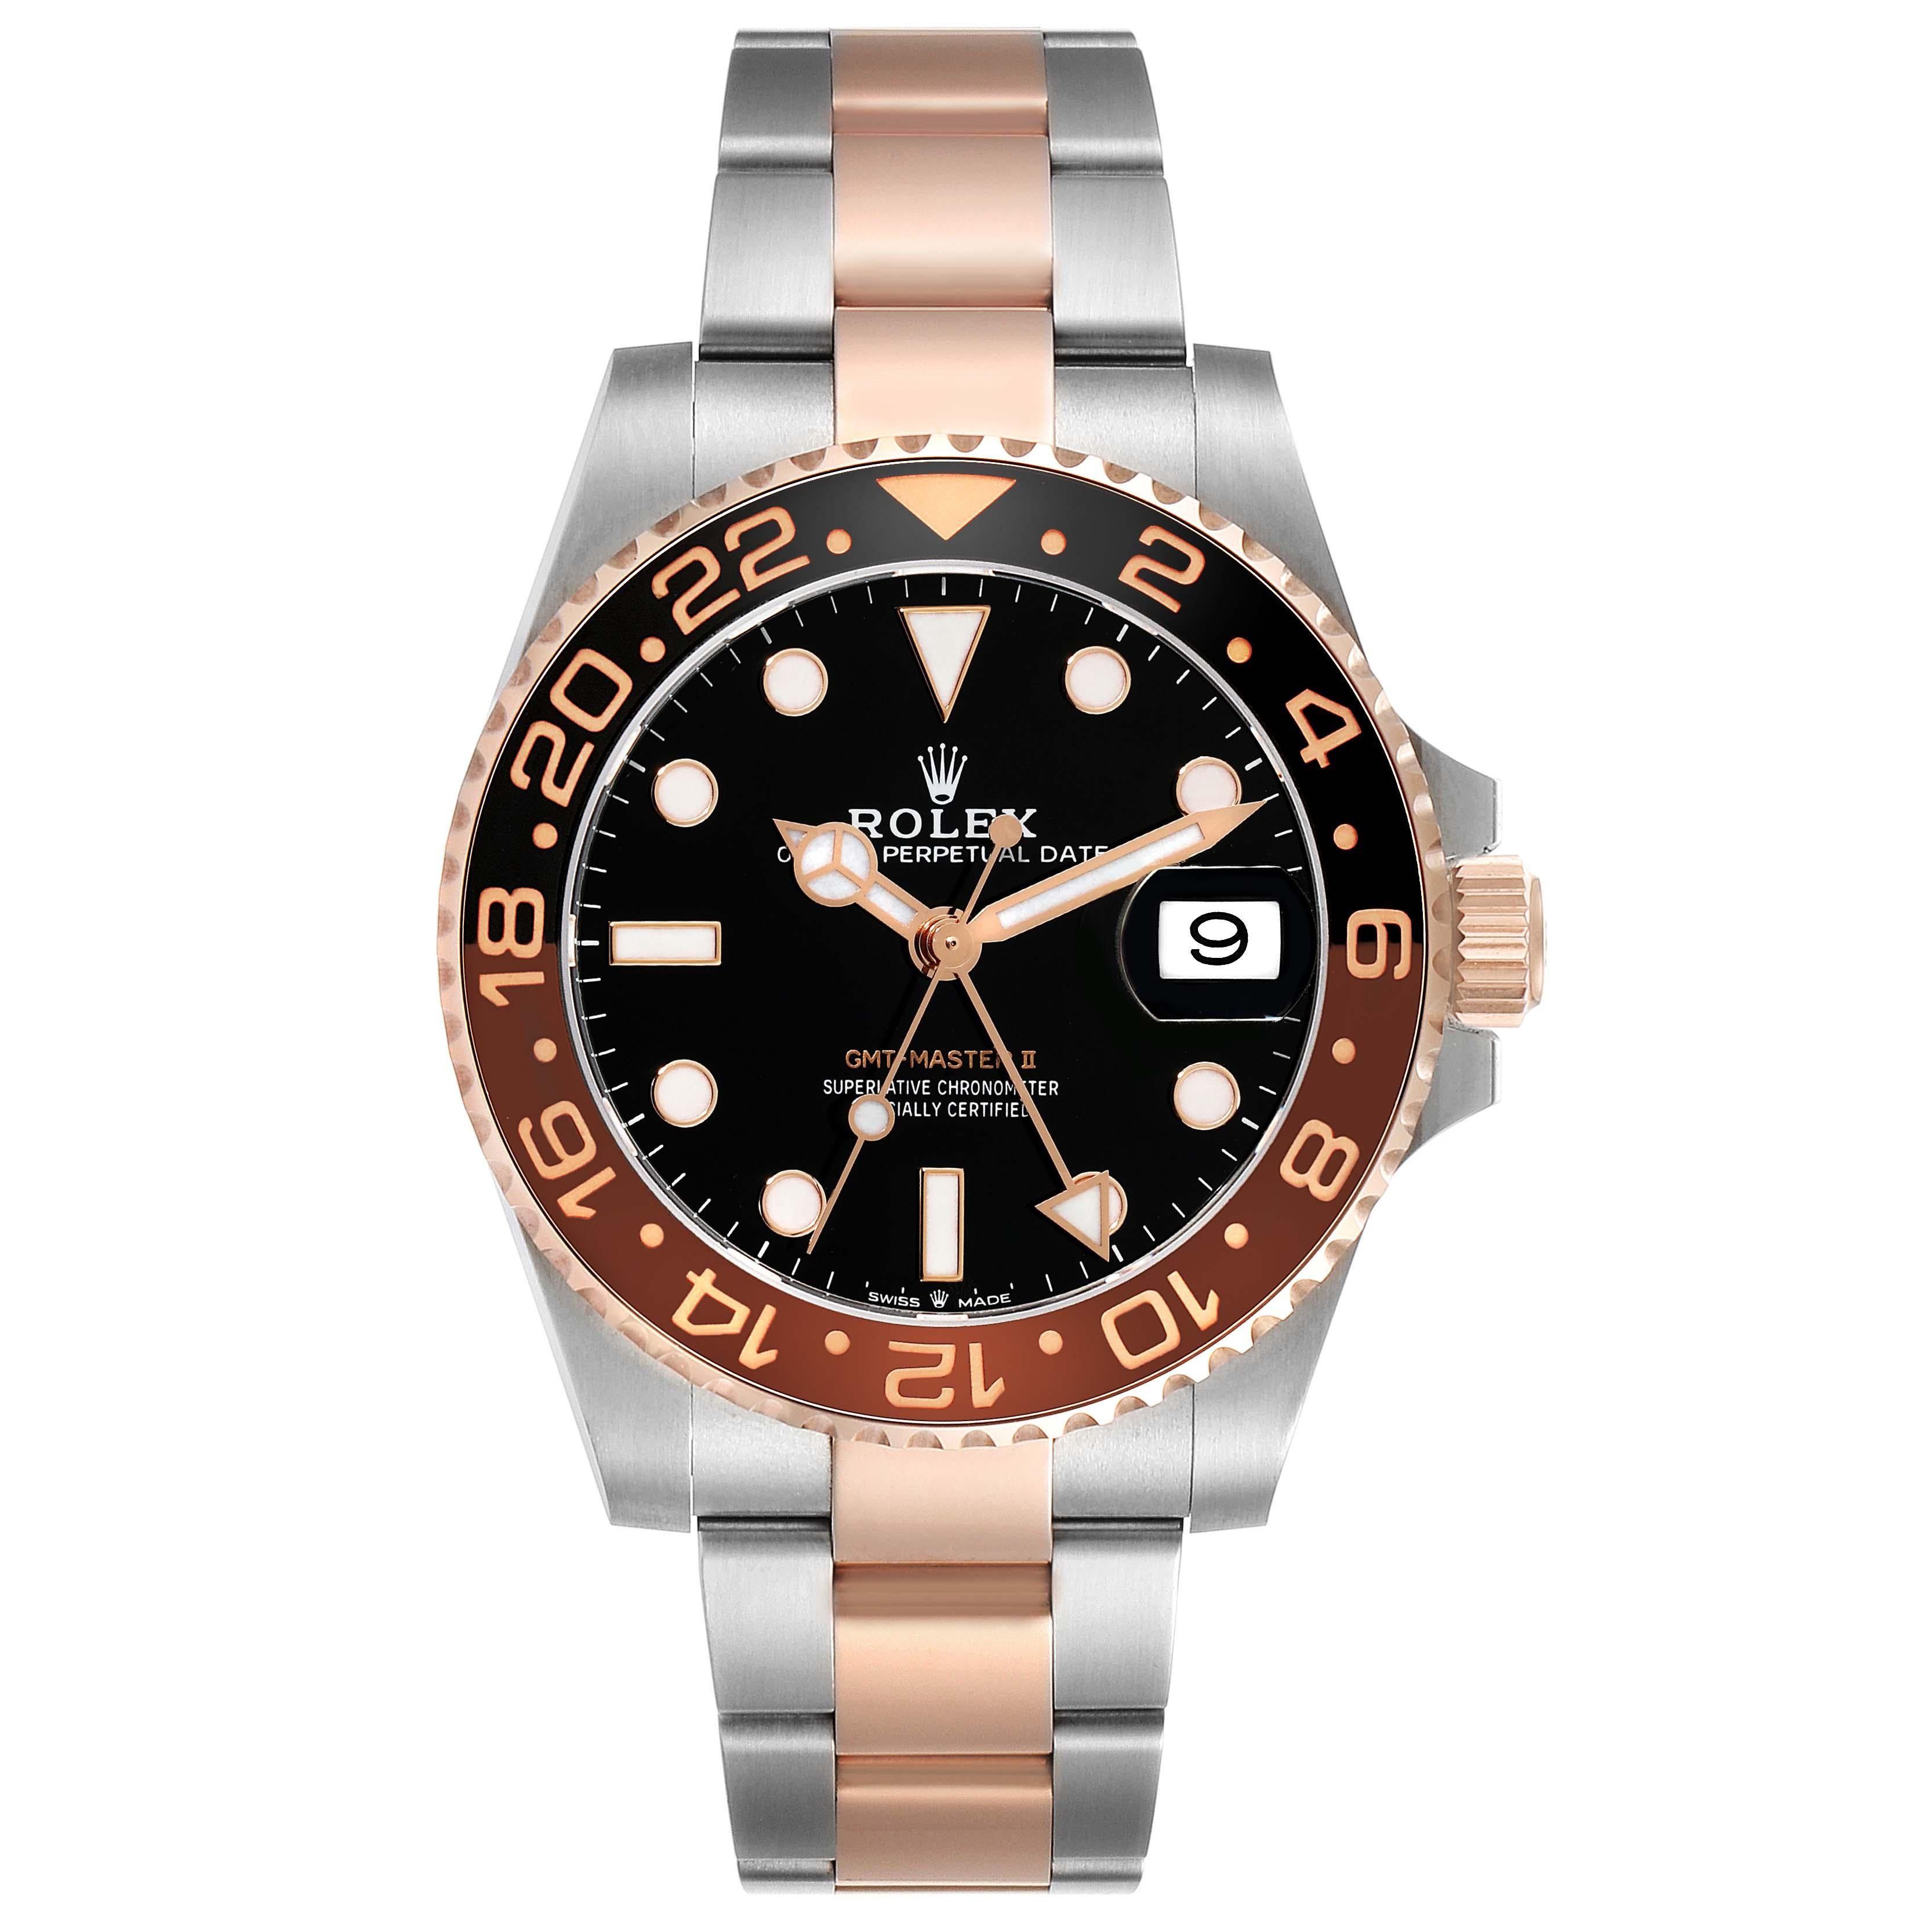 Rolex GMT Master II Steel Rose Gold Mens Watch 126711 Unworn. Officially certified chronometer automatic self-winding movement. Stainless steel and 18K Everose gold case 40.0 mm in diameter. Rolex logo on a crown. 18K Everose gold bidirectional